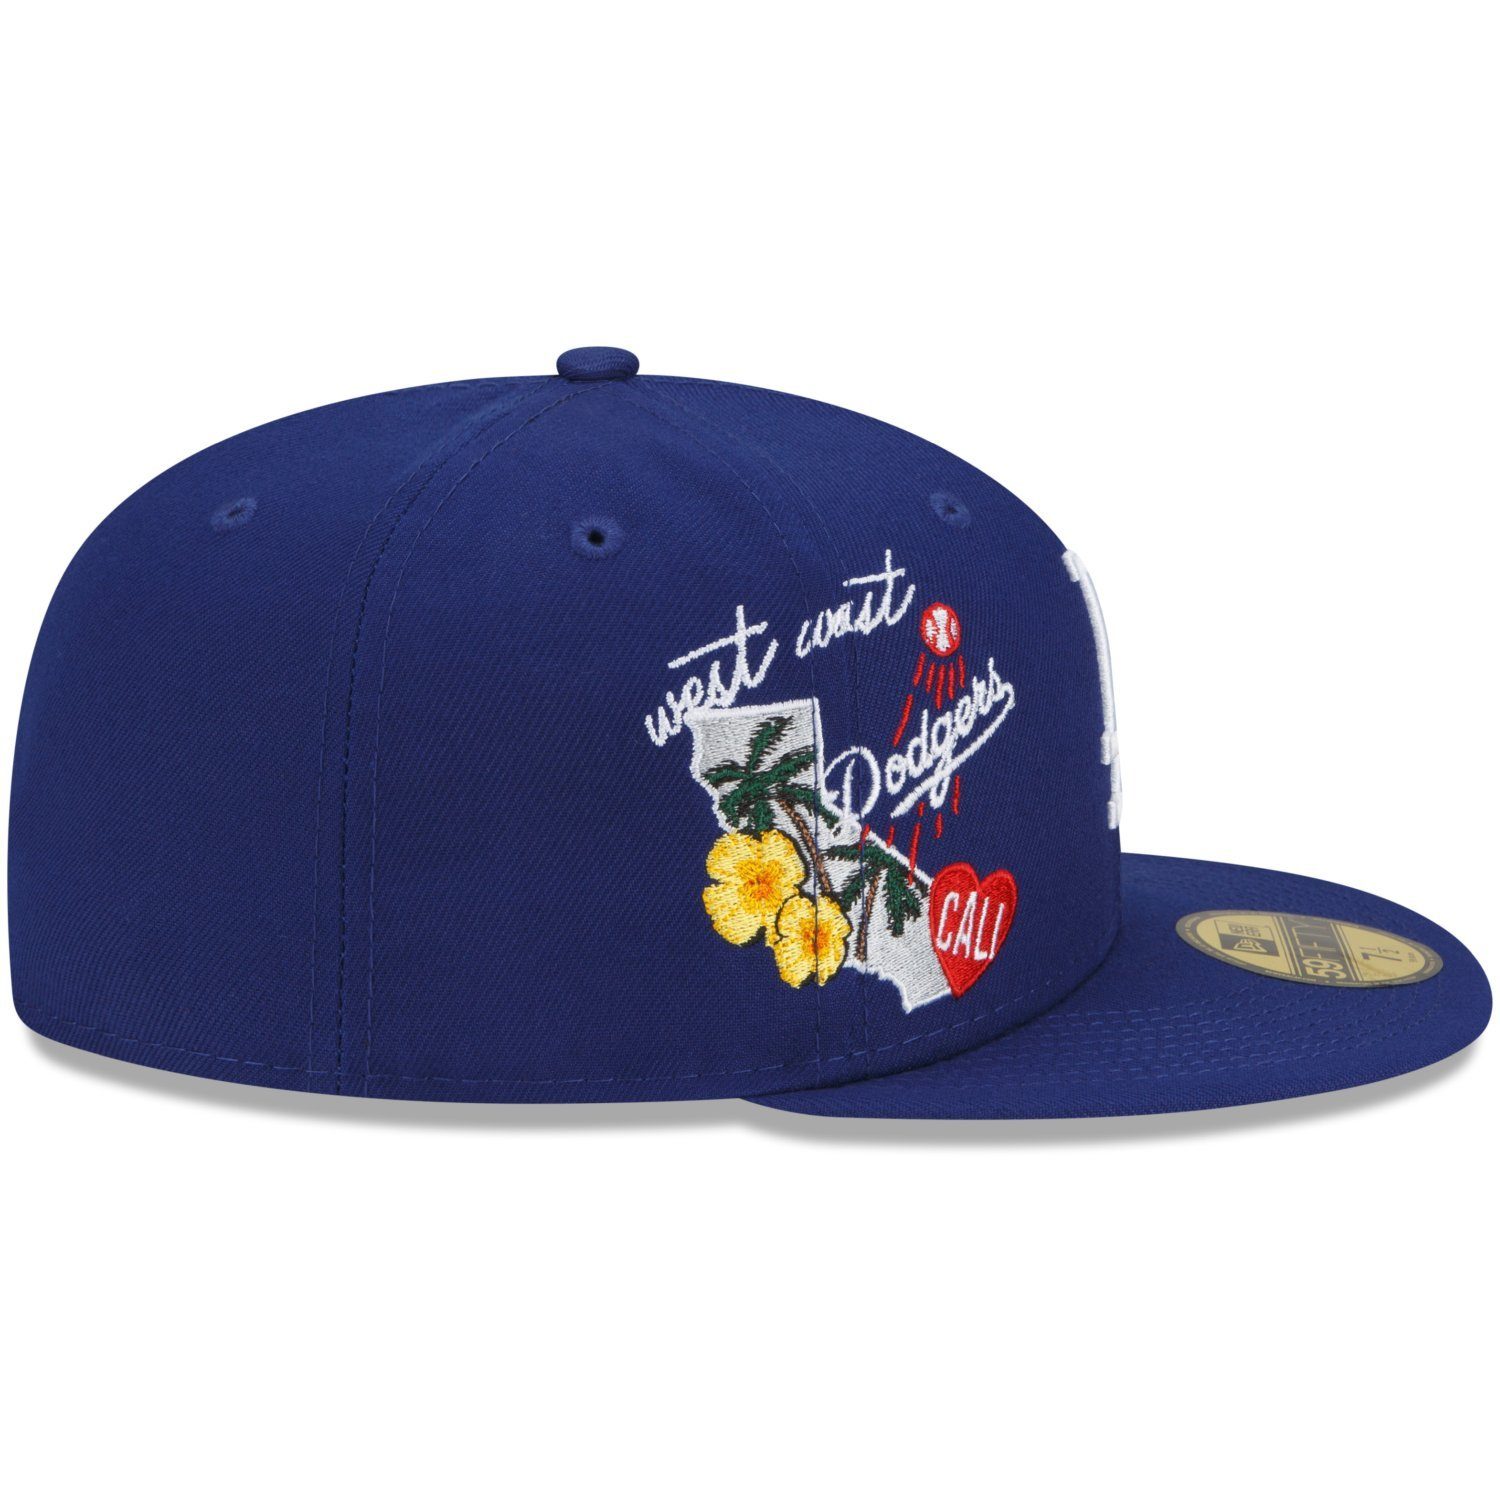 CLUSTER CITY Era Los Angeles Dodgers Cap 59Fifty Fitted New